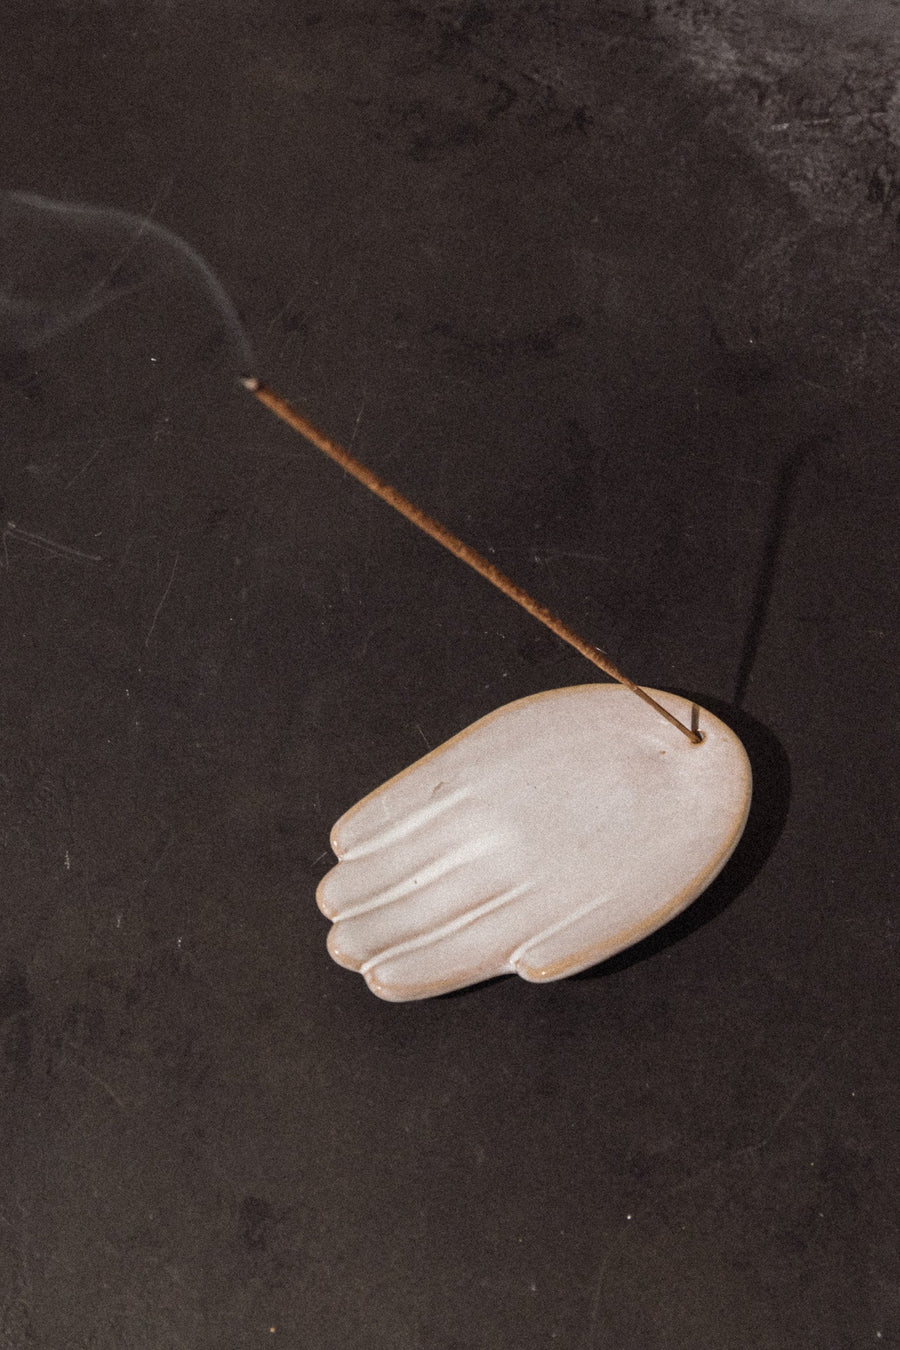 Bloomingville Objects Cream / FINAL SALE The Giver Incense Holder